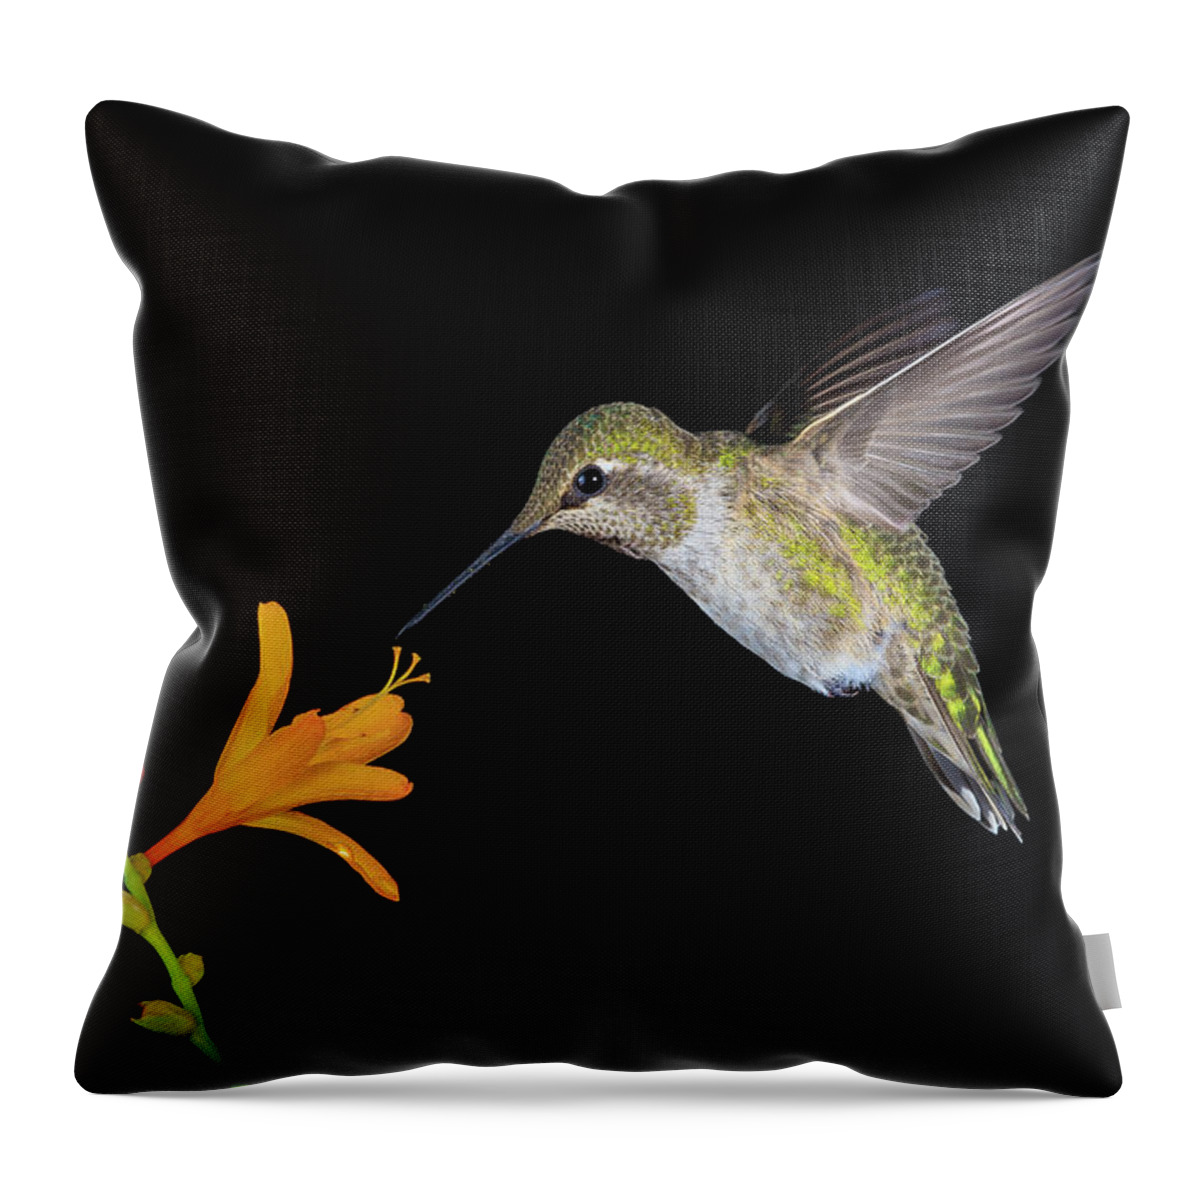 Animal Throw Pillow featuring the photograph Nightcap by Briand Sanderson